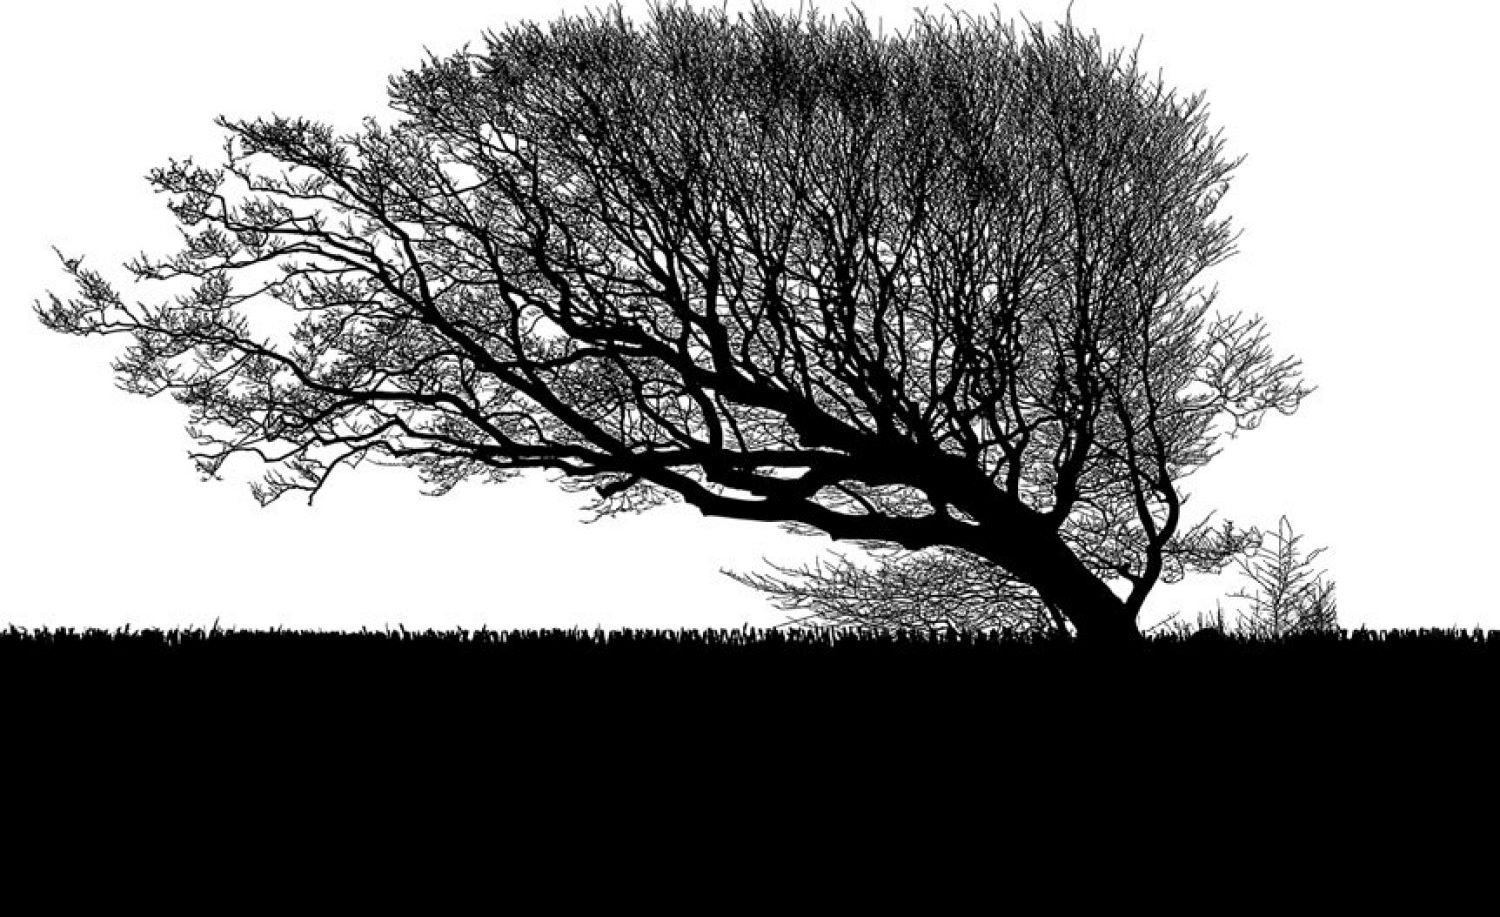 Black and white image of a tree with bare branches